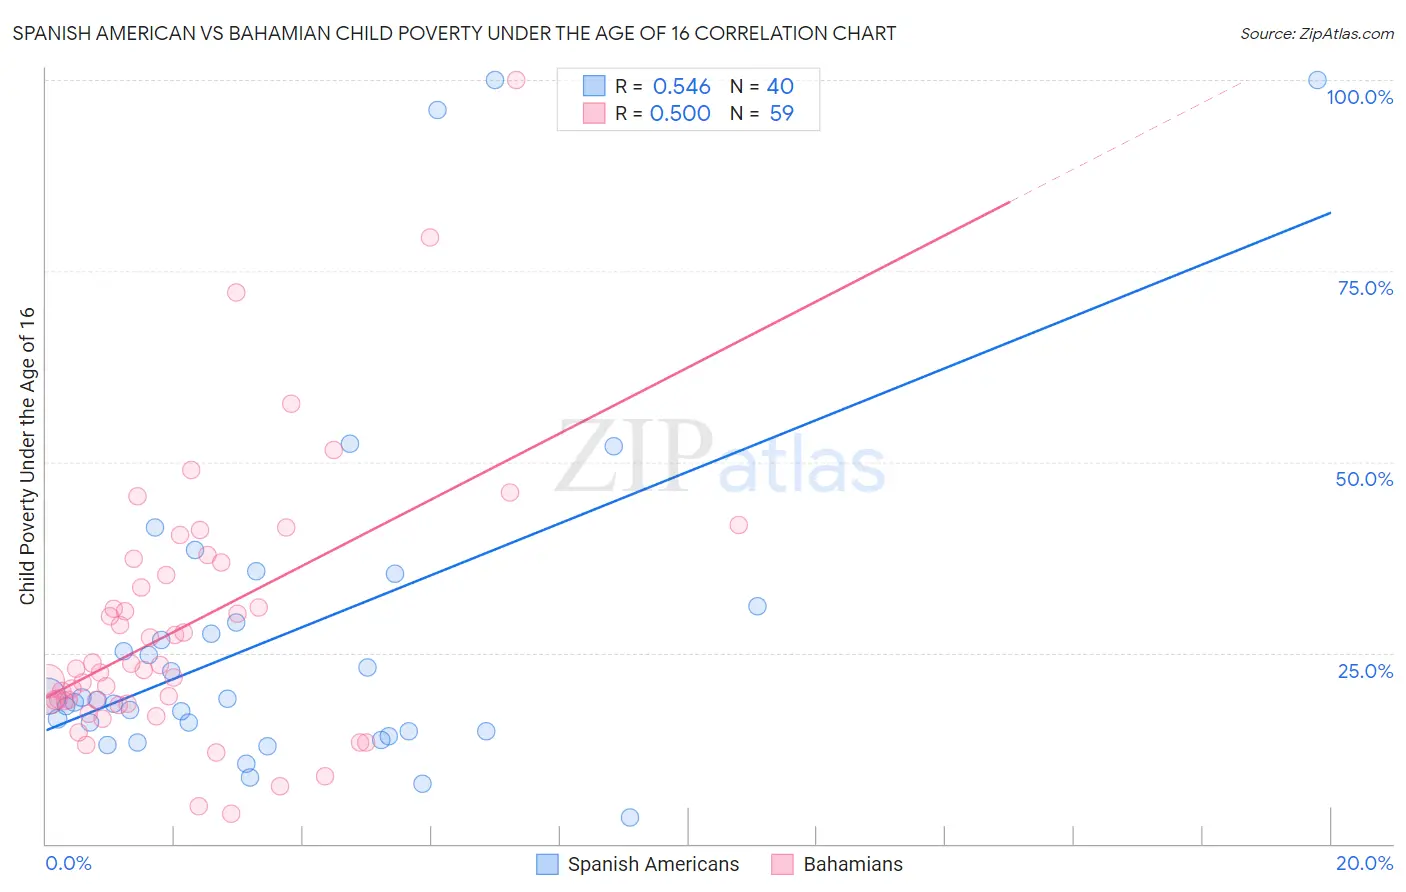 Spanish American vs Bahamian Child Poverty Under the Age of 16